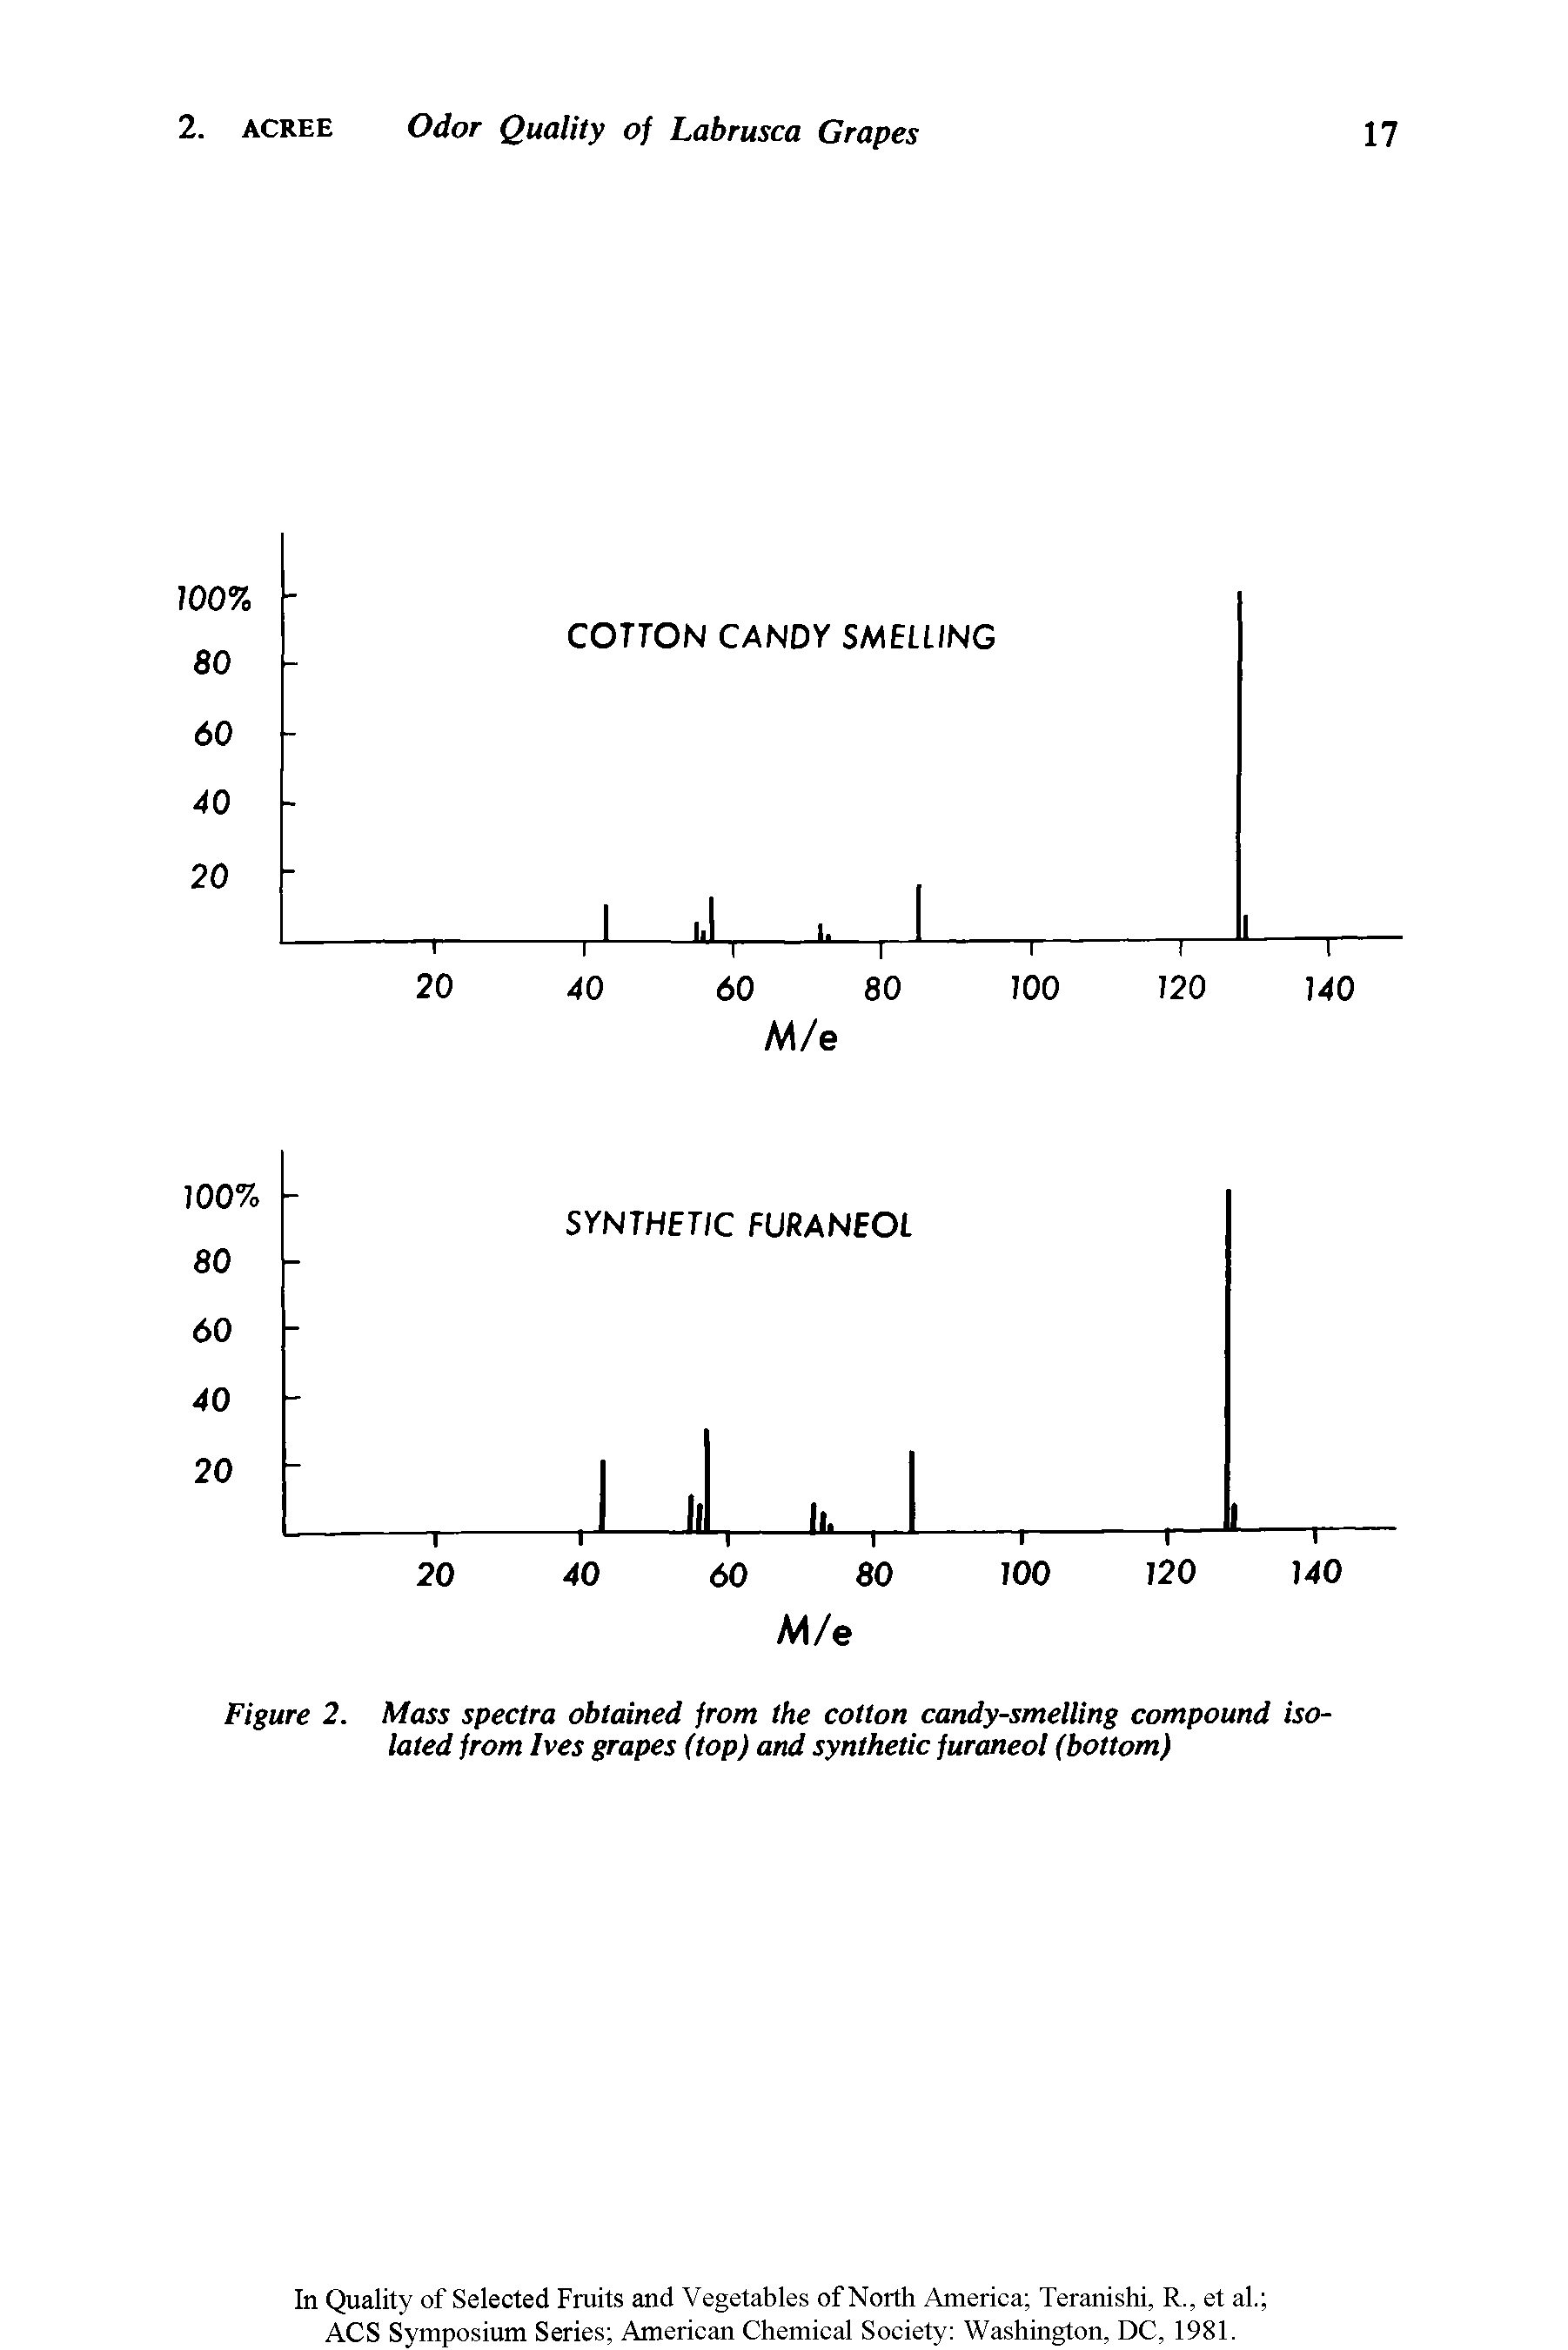 Figure 2. Mass spectra obtained from the cotton candy-smelling compound isolated from Ives grapes (top) and synthetic furaneol (bottom)...